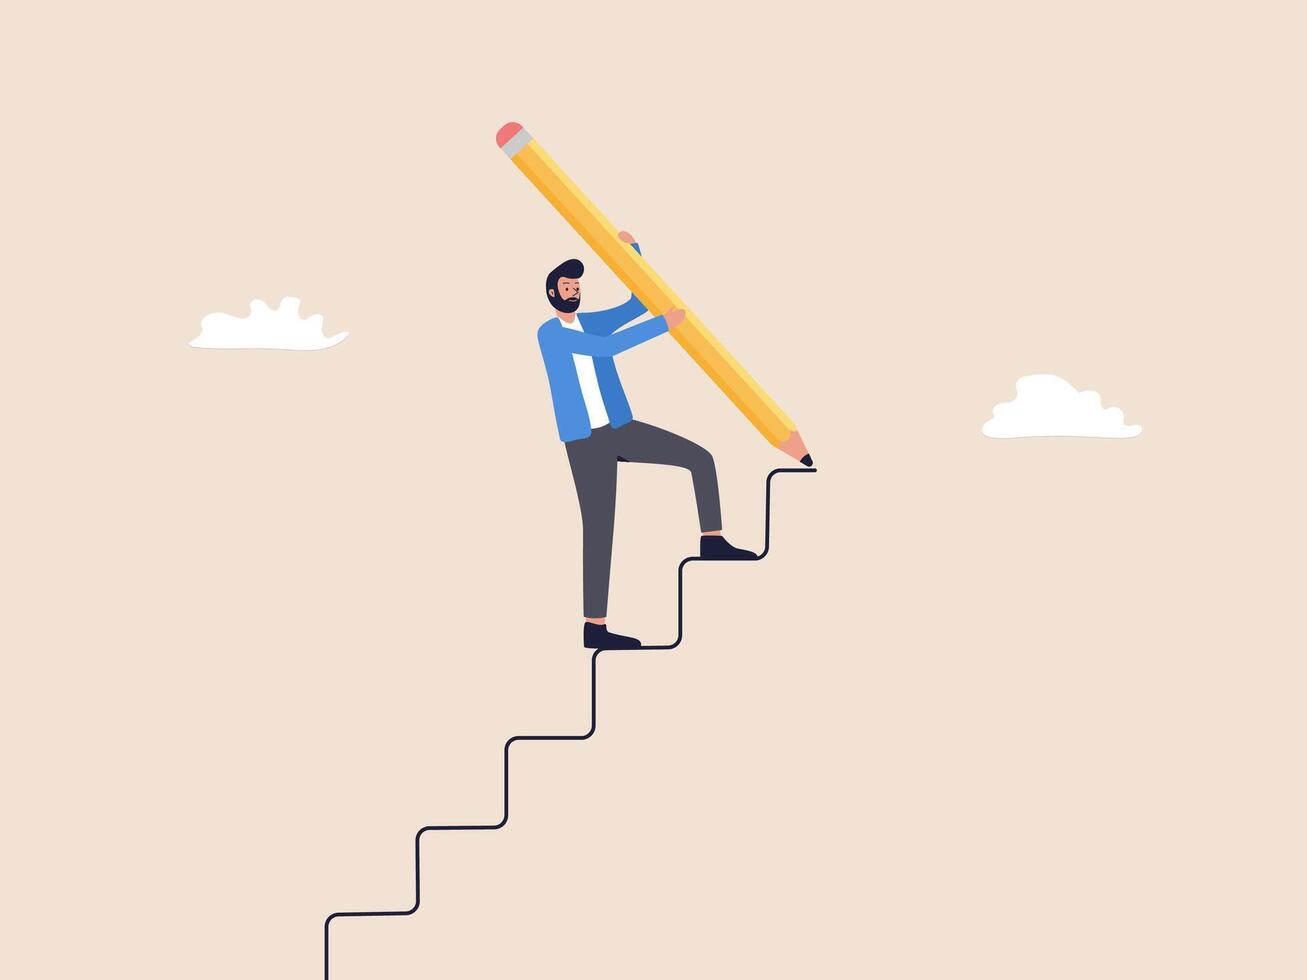 A determined businessman ascends stairs towards success, wielding a colossal pencil to construct his path to achievement. A motivating illustration for career endeavors and triumphs. vector